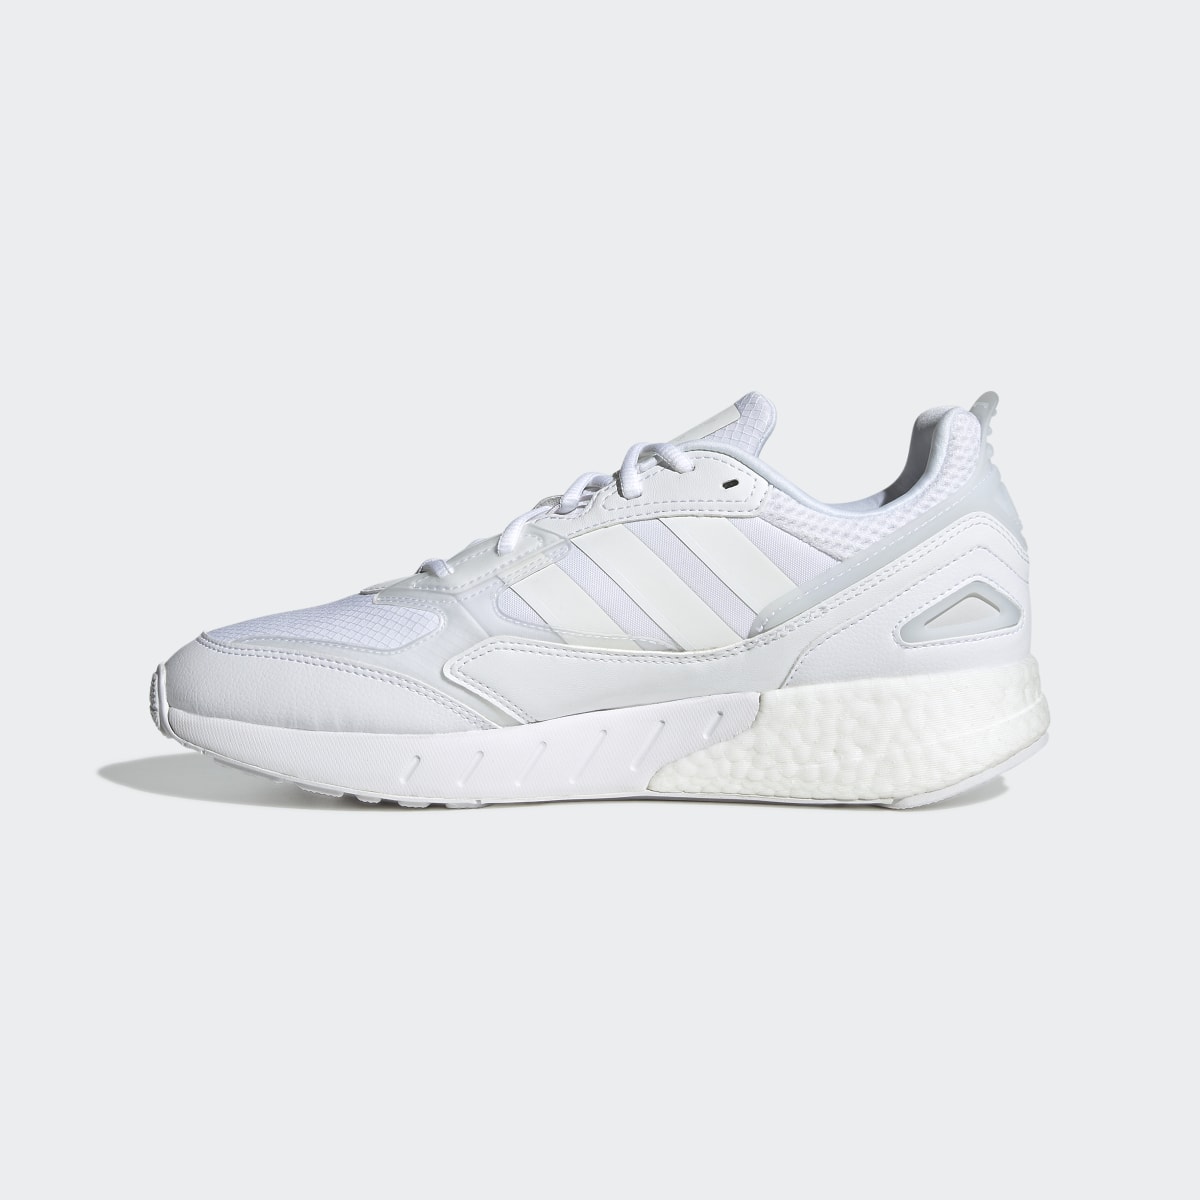 Adidas ZX 1K Boost 2.0 Shoes. 7